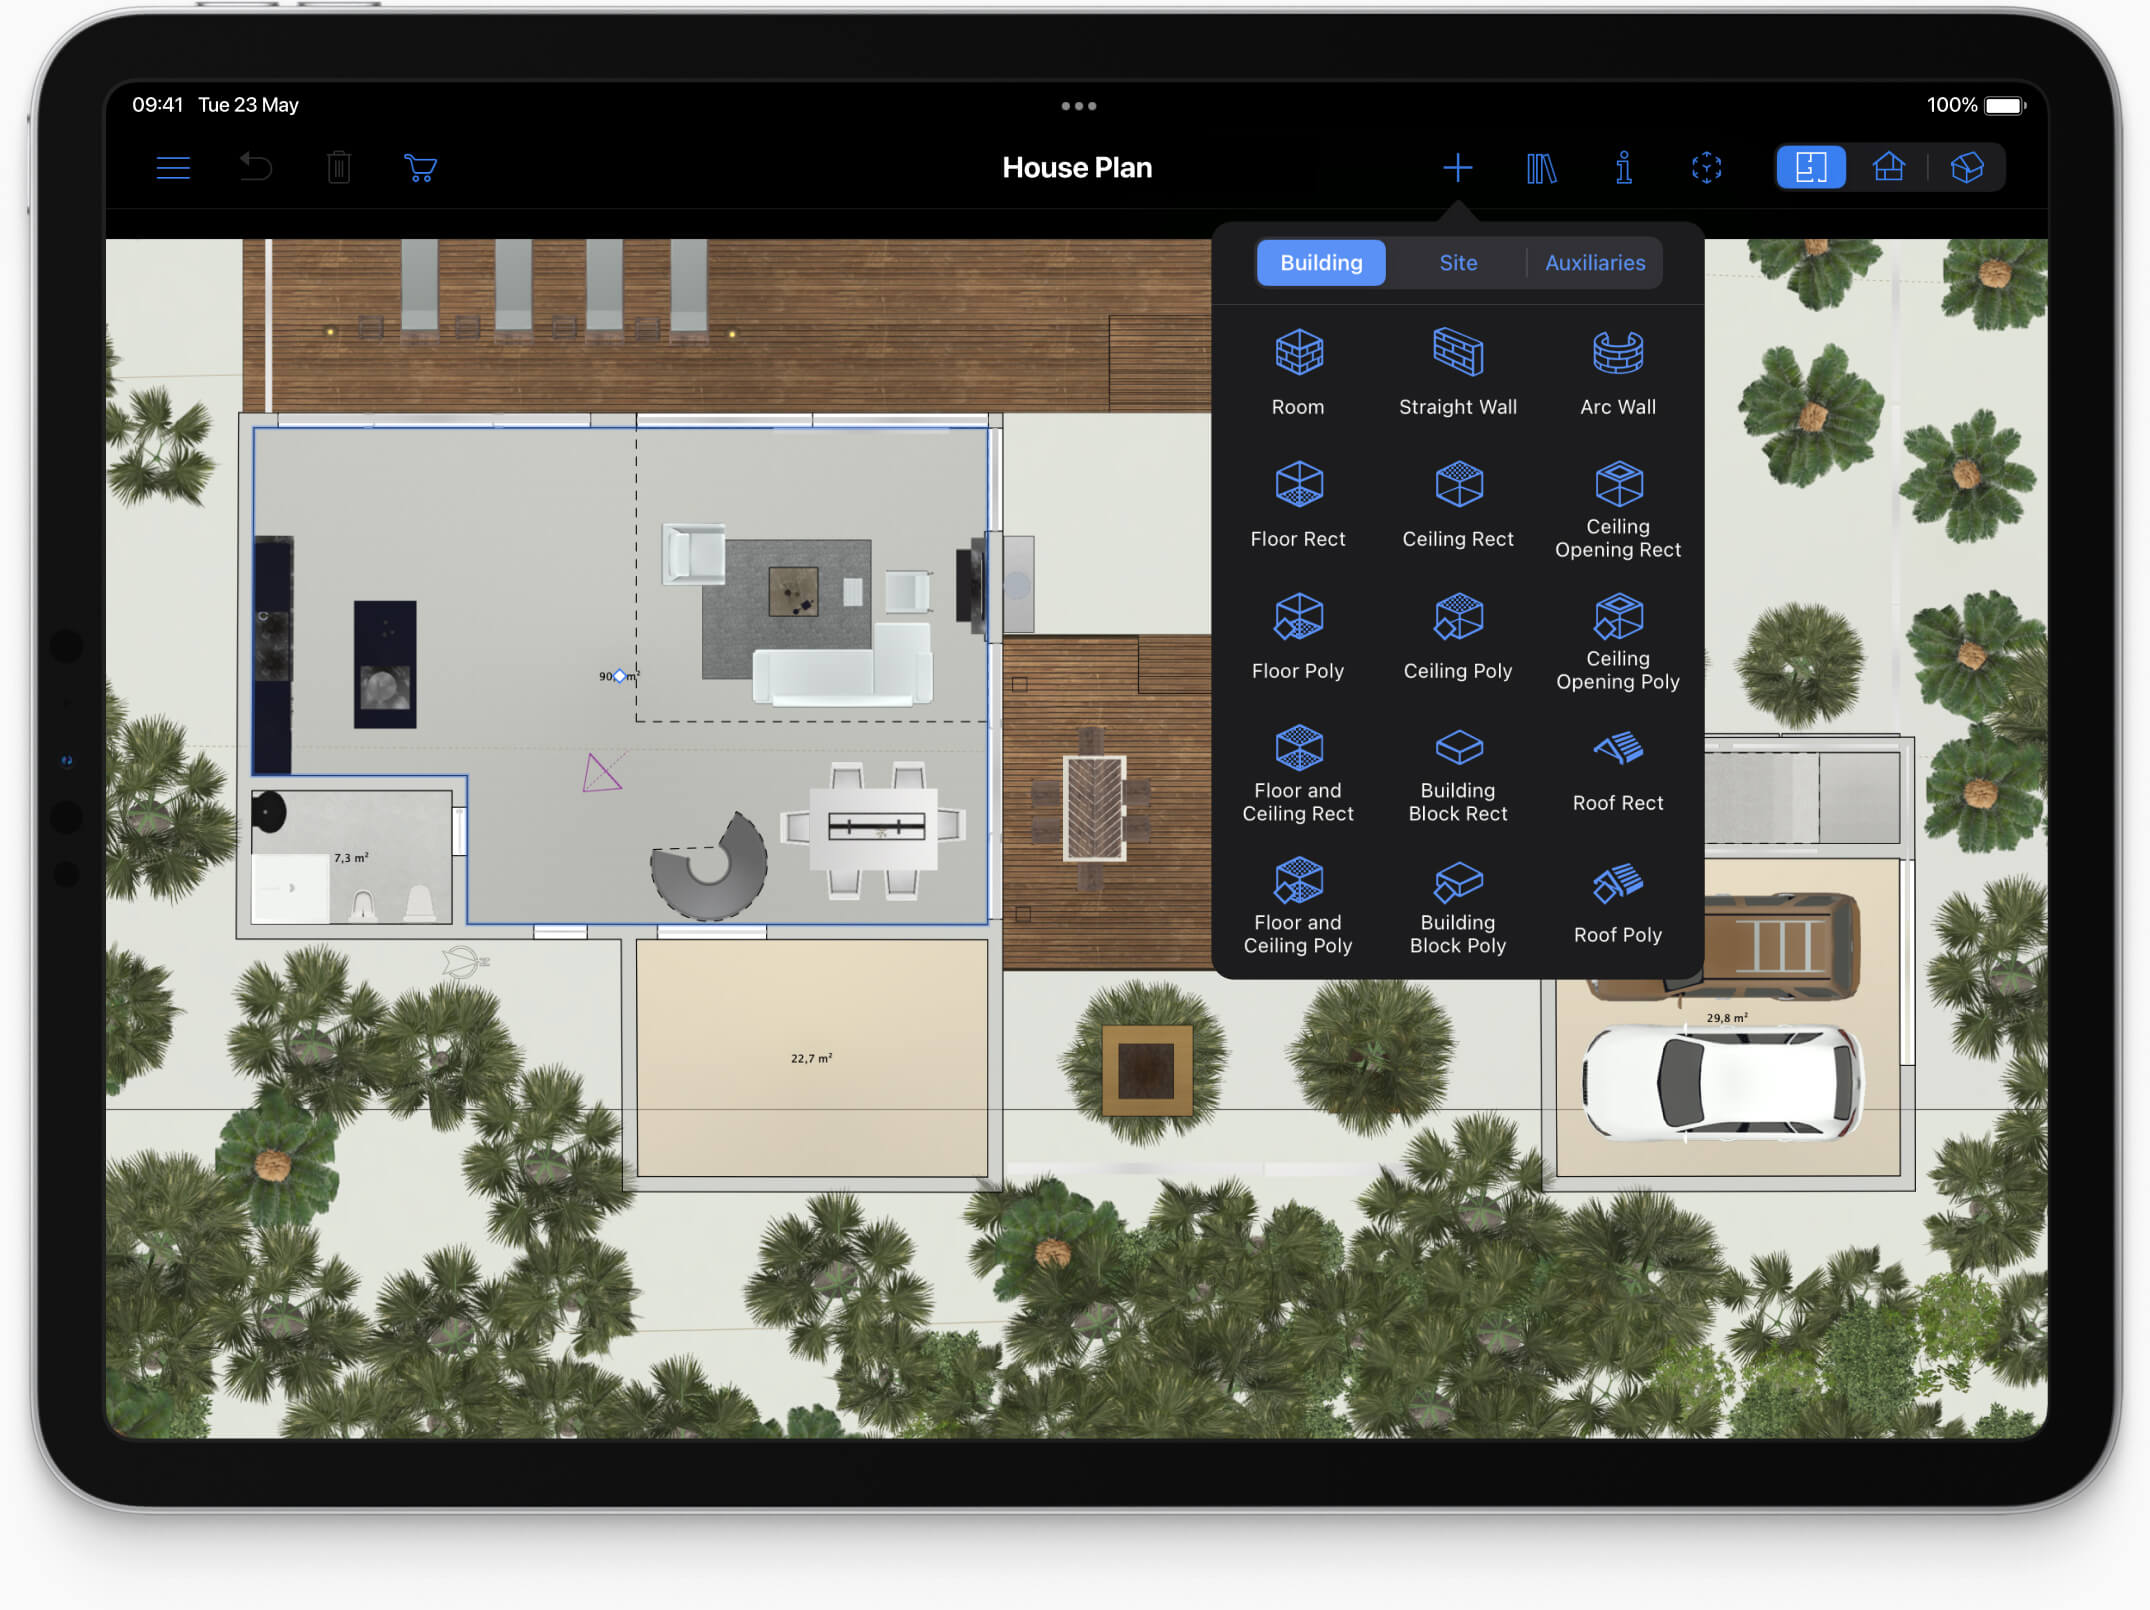 Home design software for floor plans on an iPad.